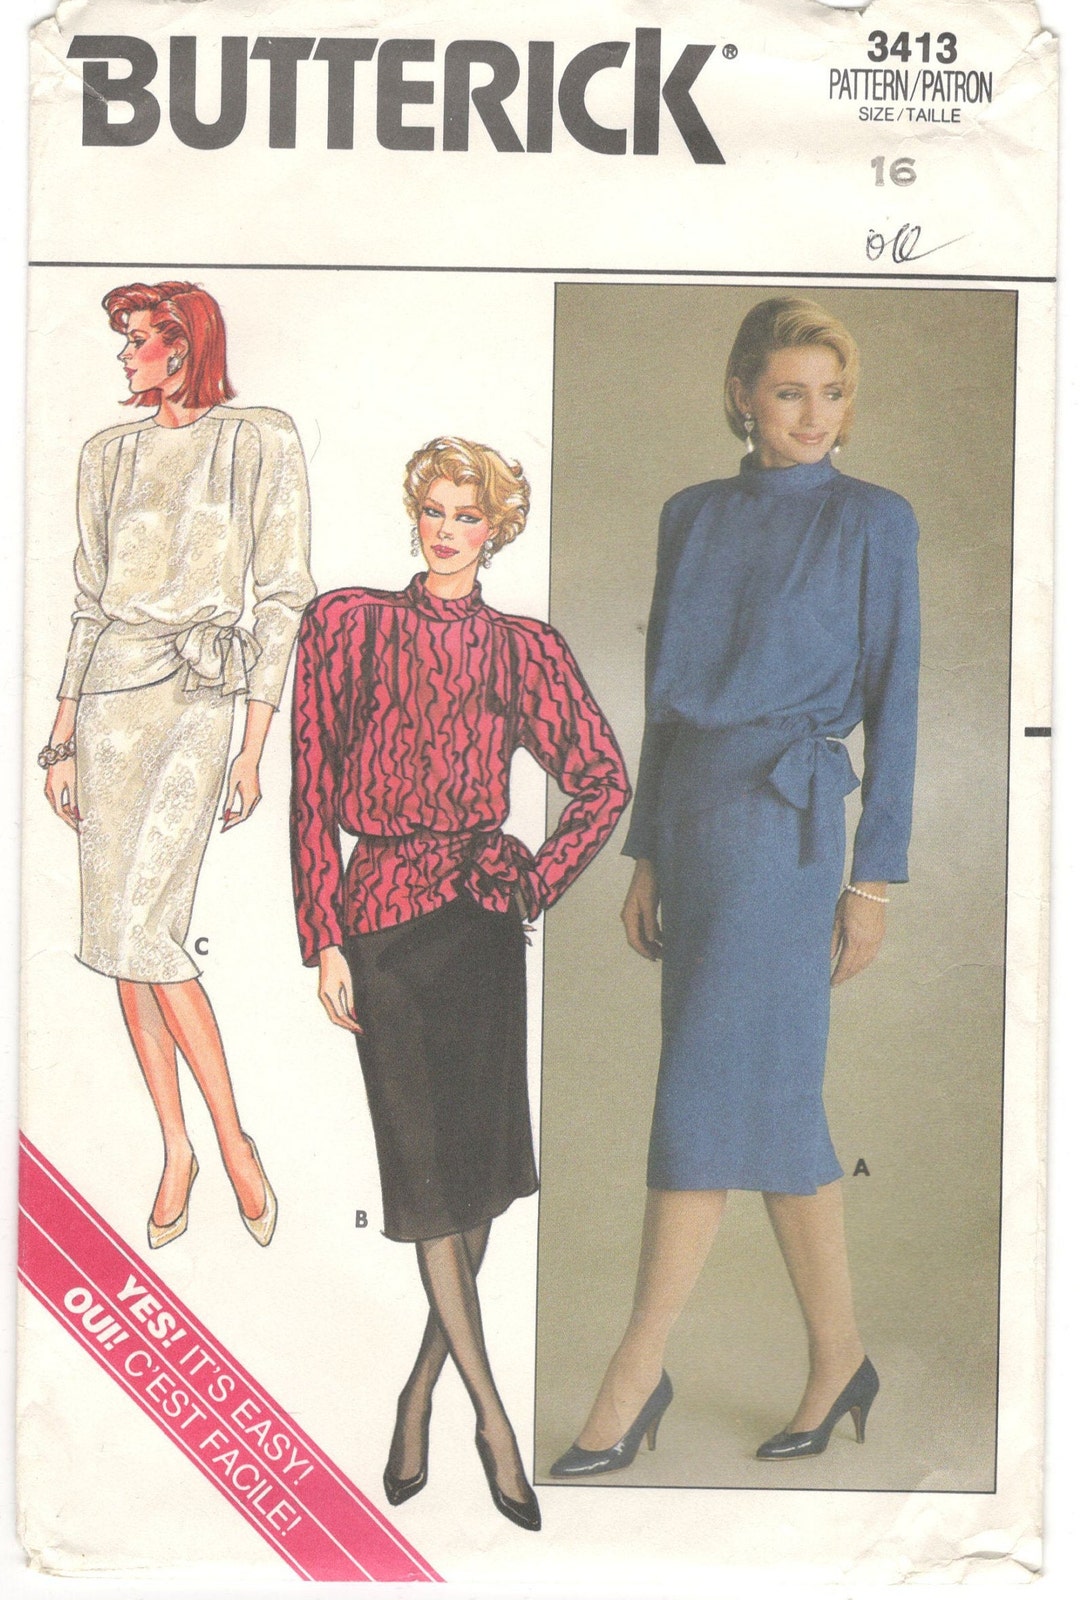 Butterick 3413 Sewing Pattern Misses' Top and Skirt Size - Etsy